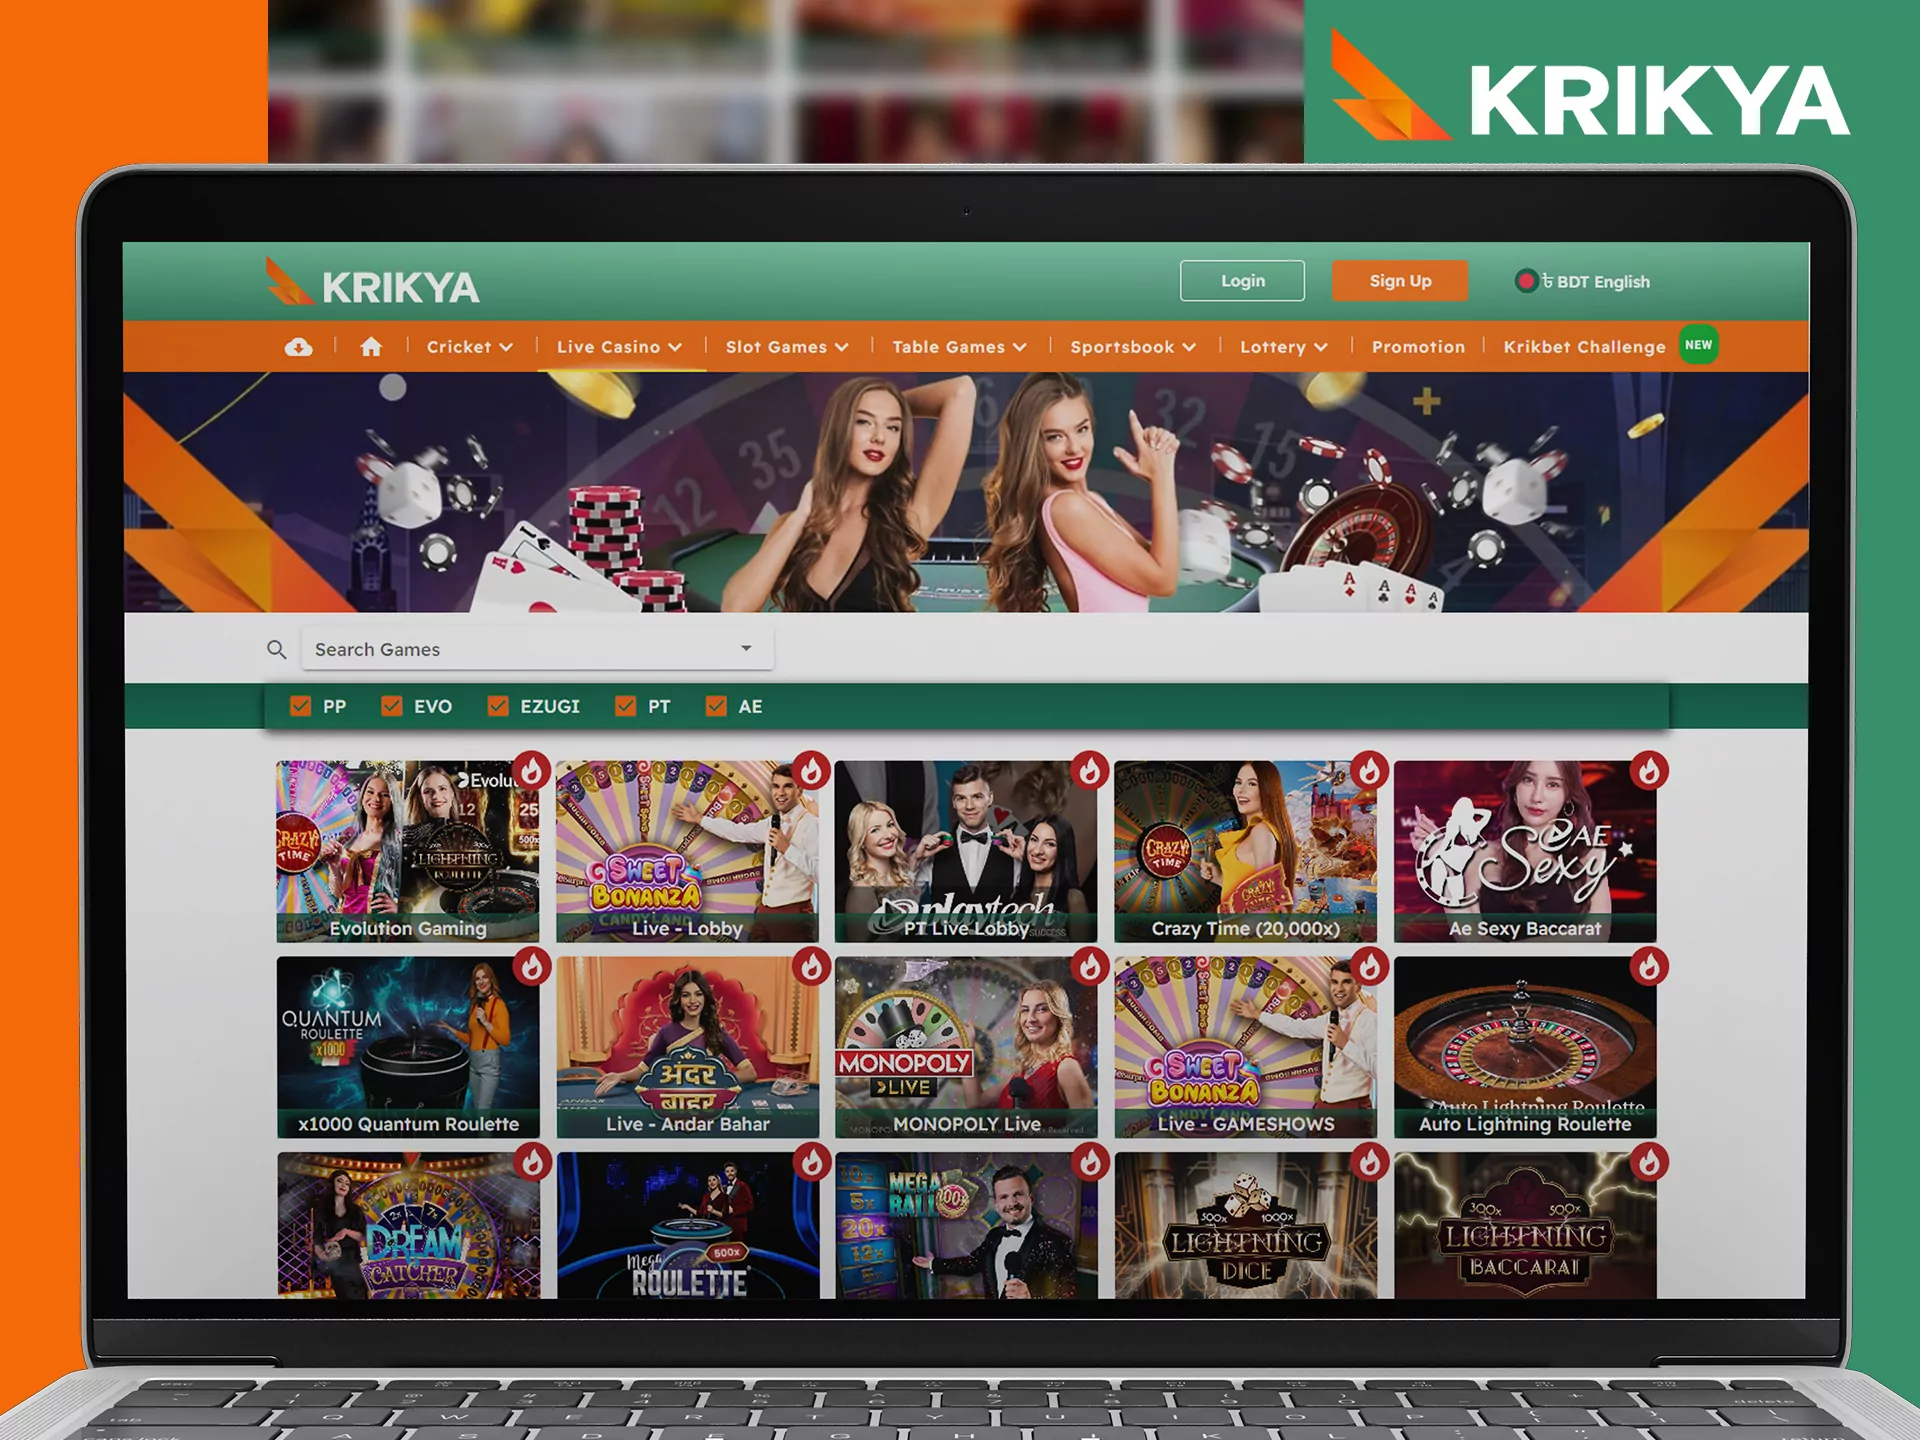 Enter the Krikya main page and start your journey.